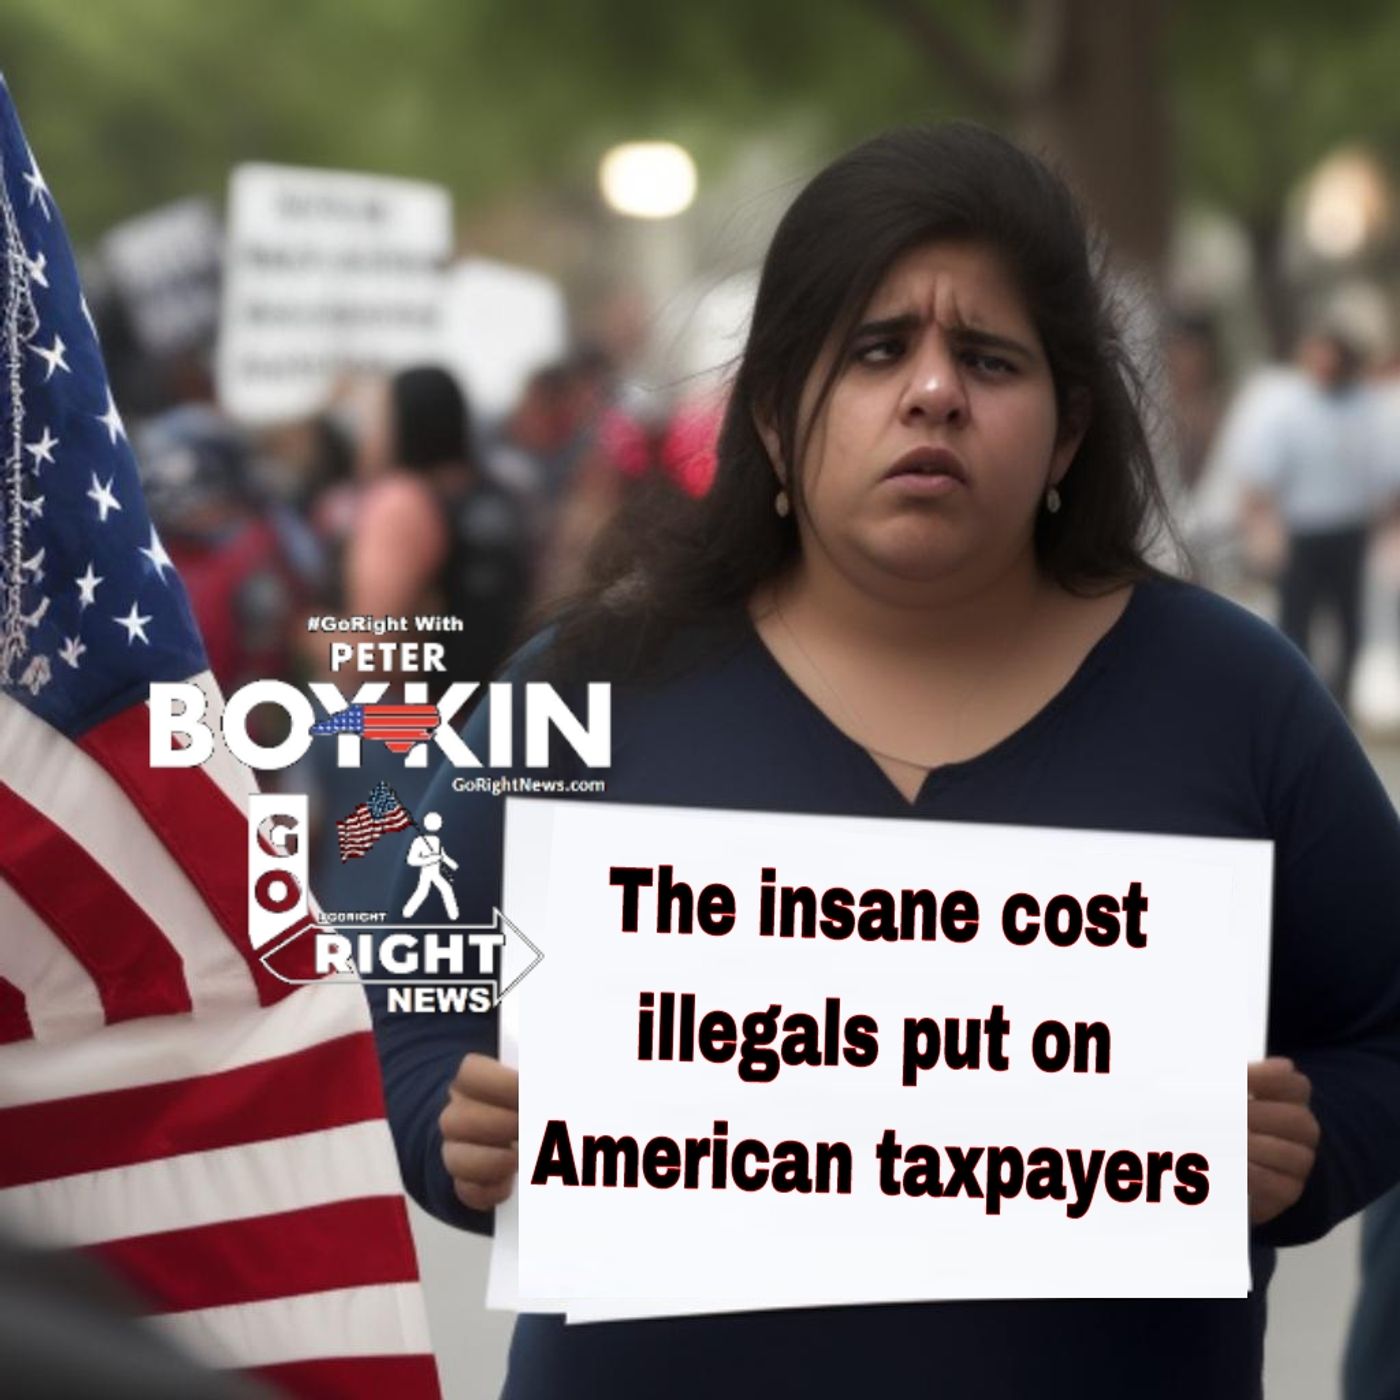 The insane cost illegals put on American taxpayers